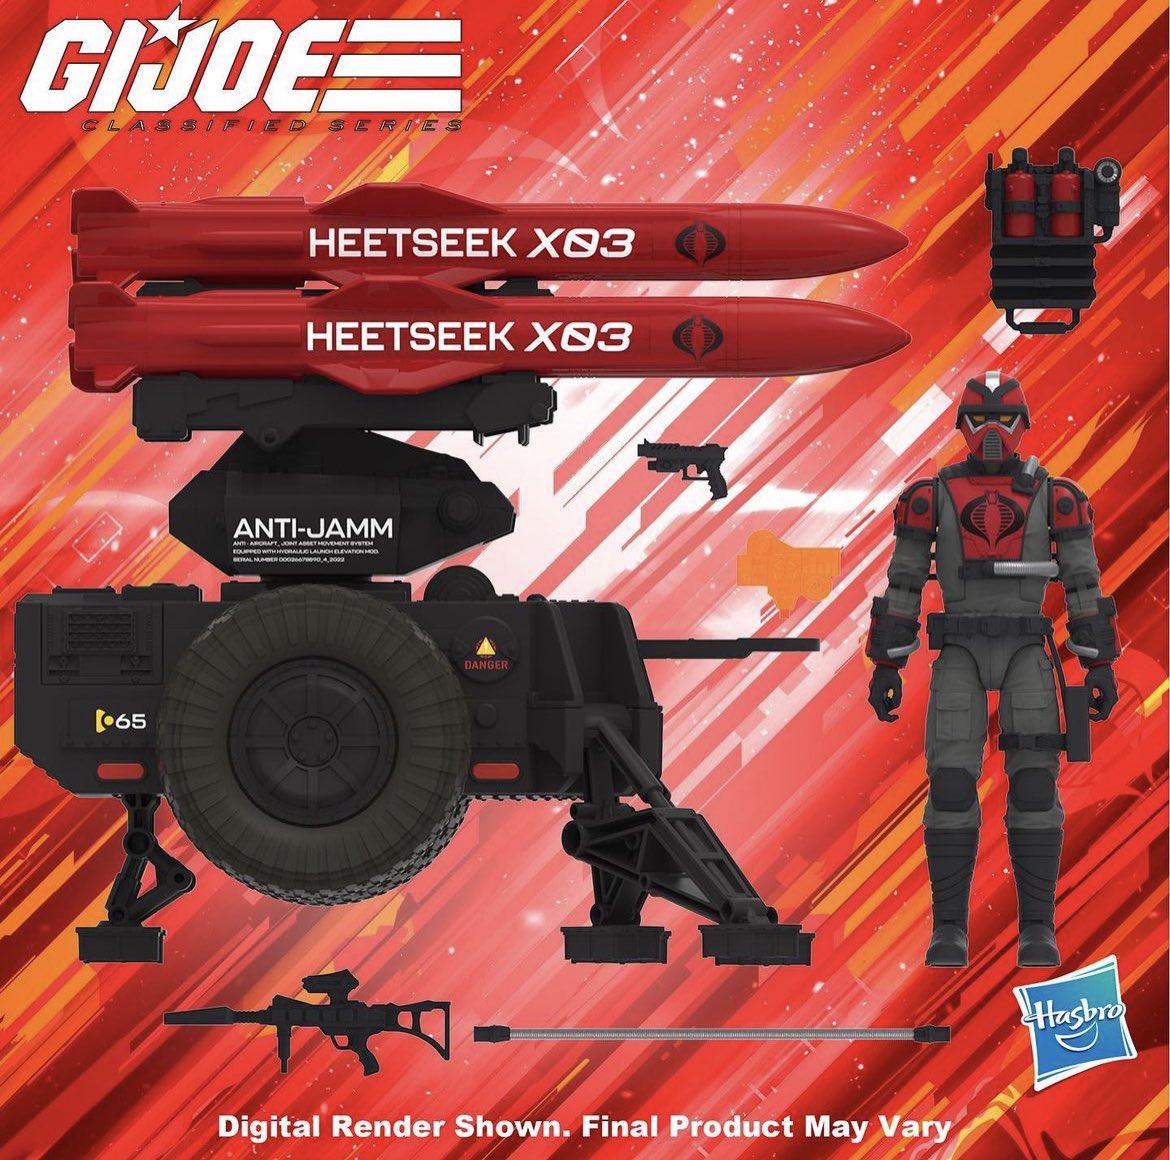 Renders of the G.I. Joe Clutch & Vamp, as well as the TechnoViper & SMS.